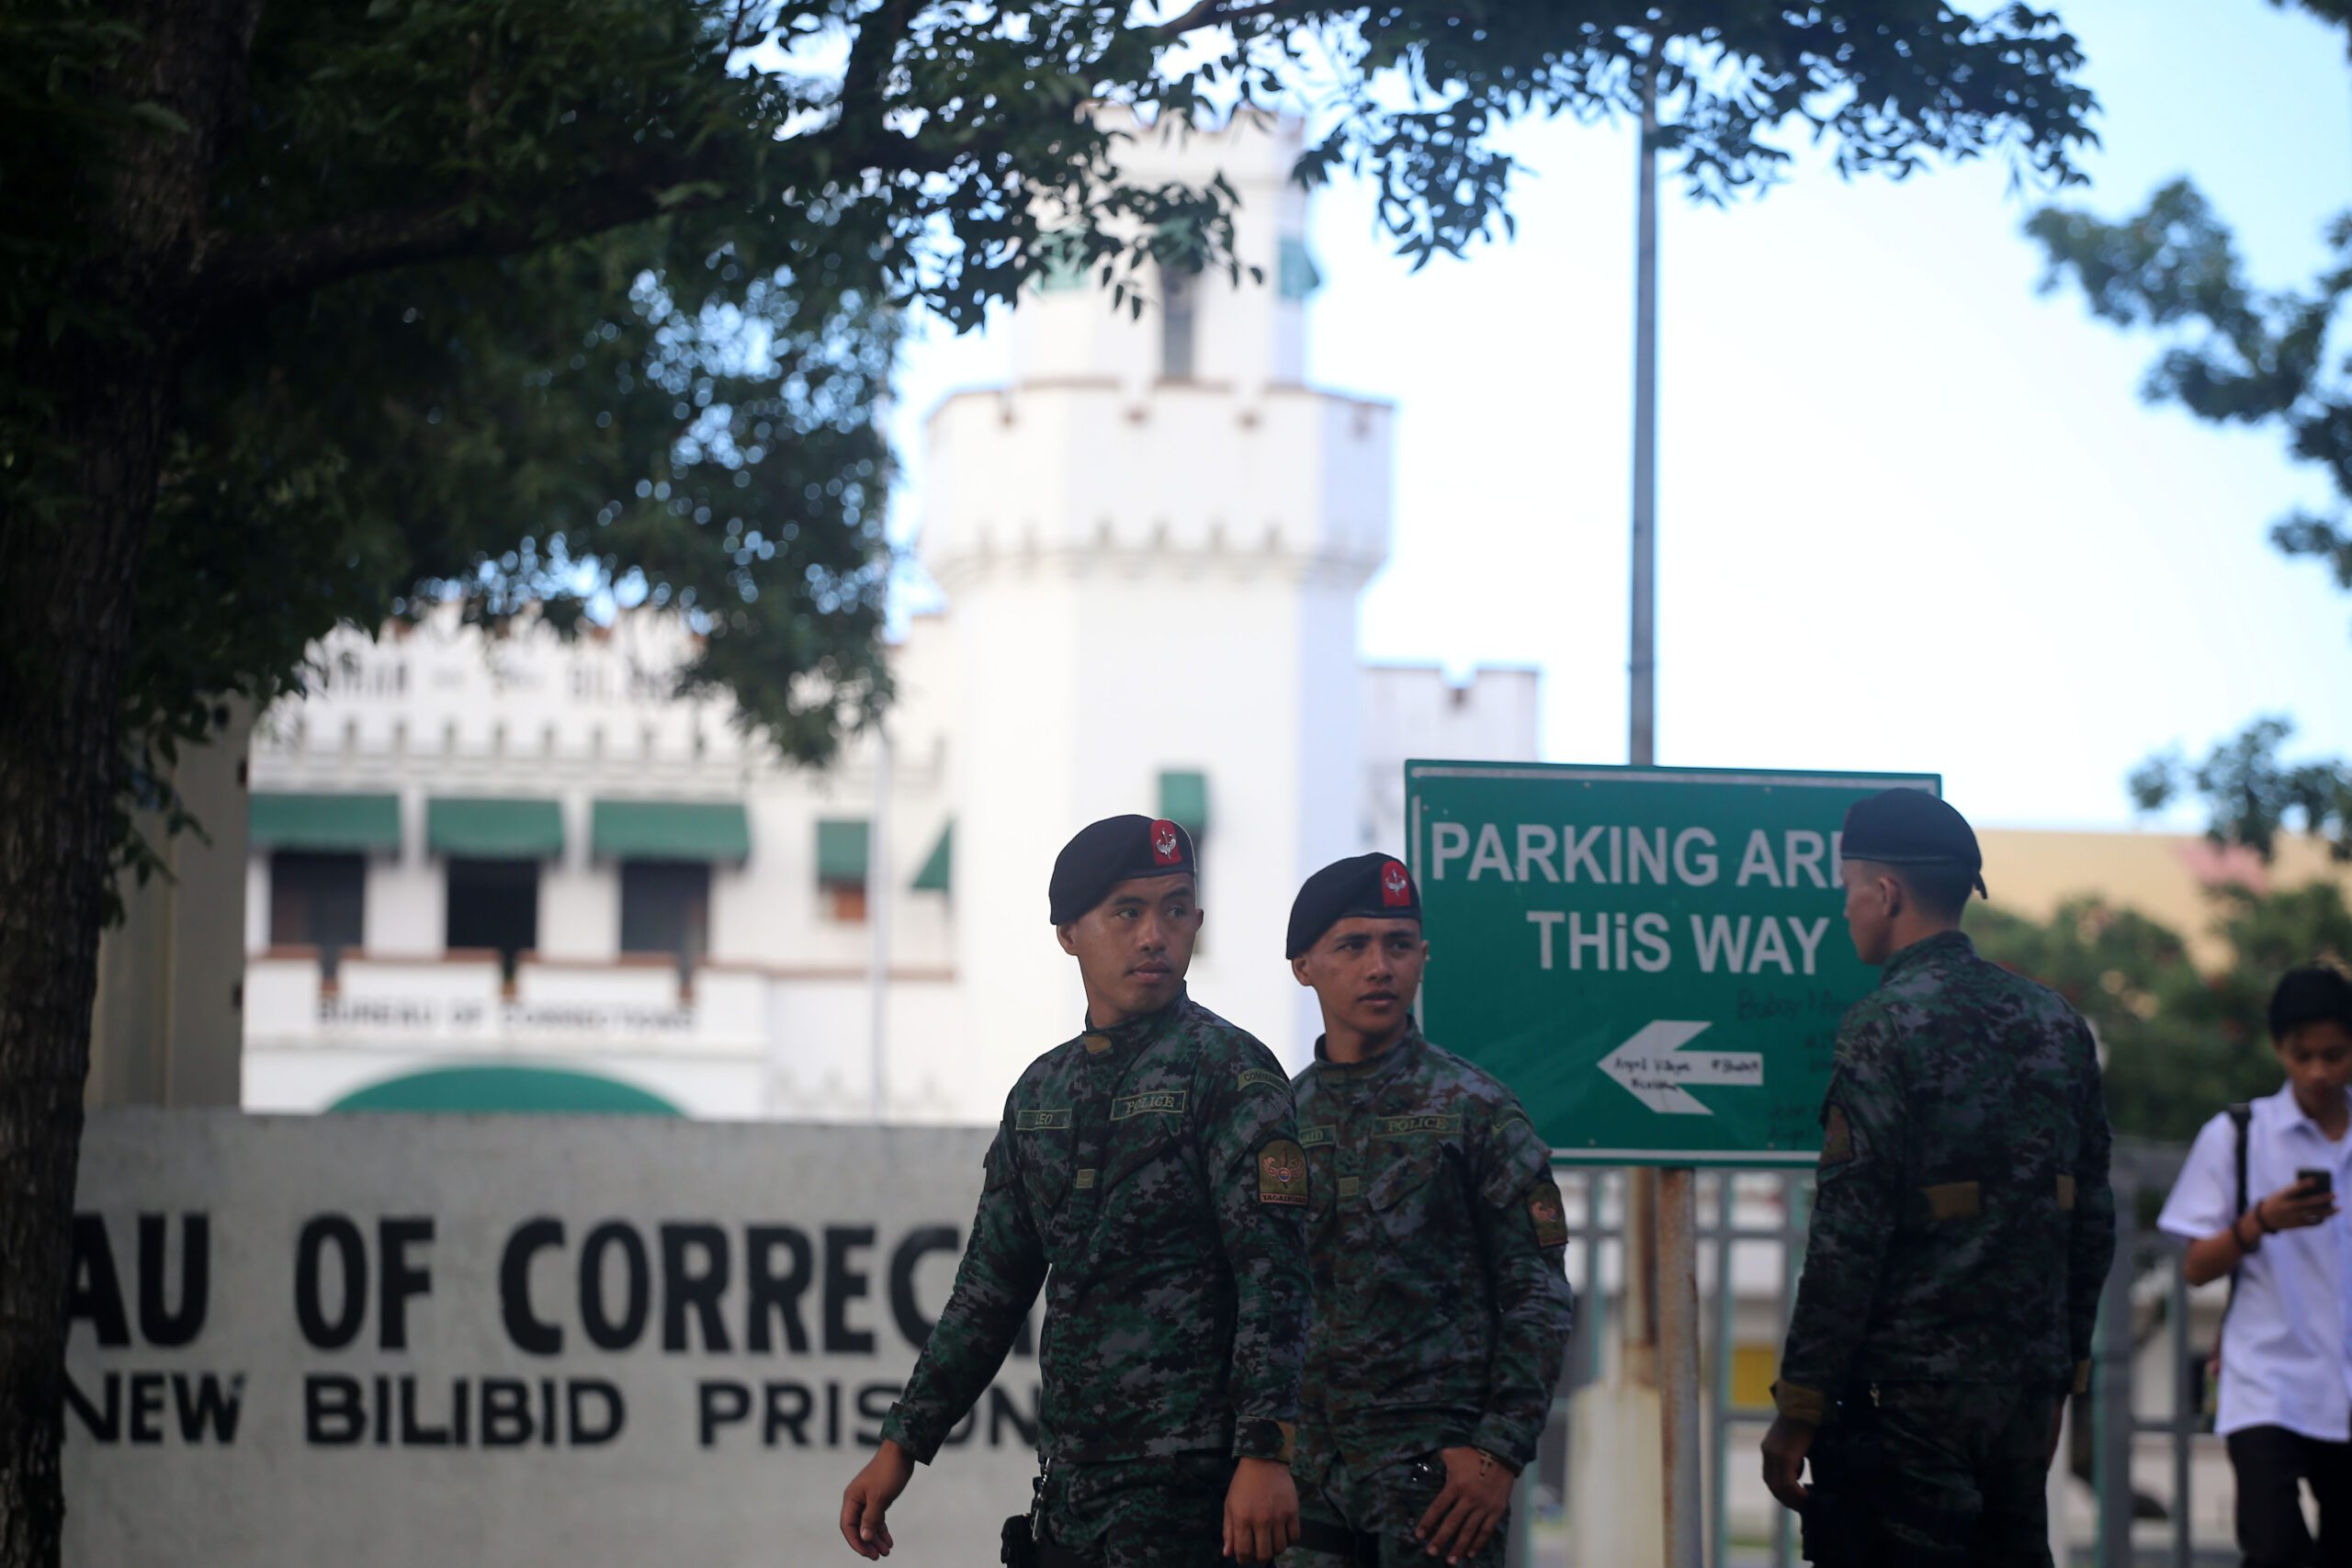 Illegal drugs found in Bilibid even after SAF takeover